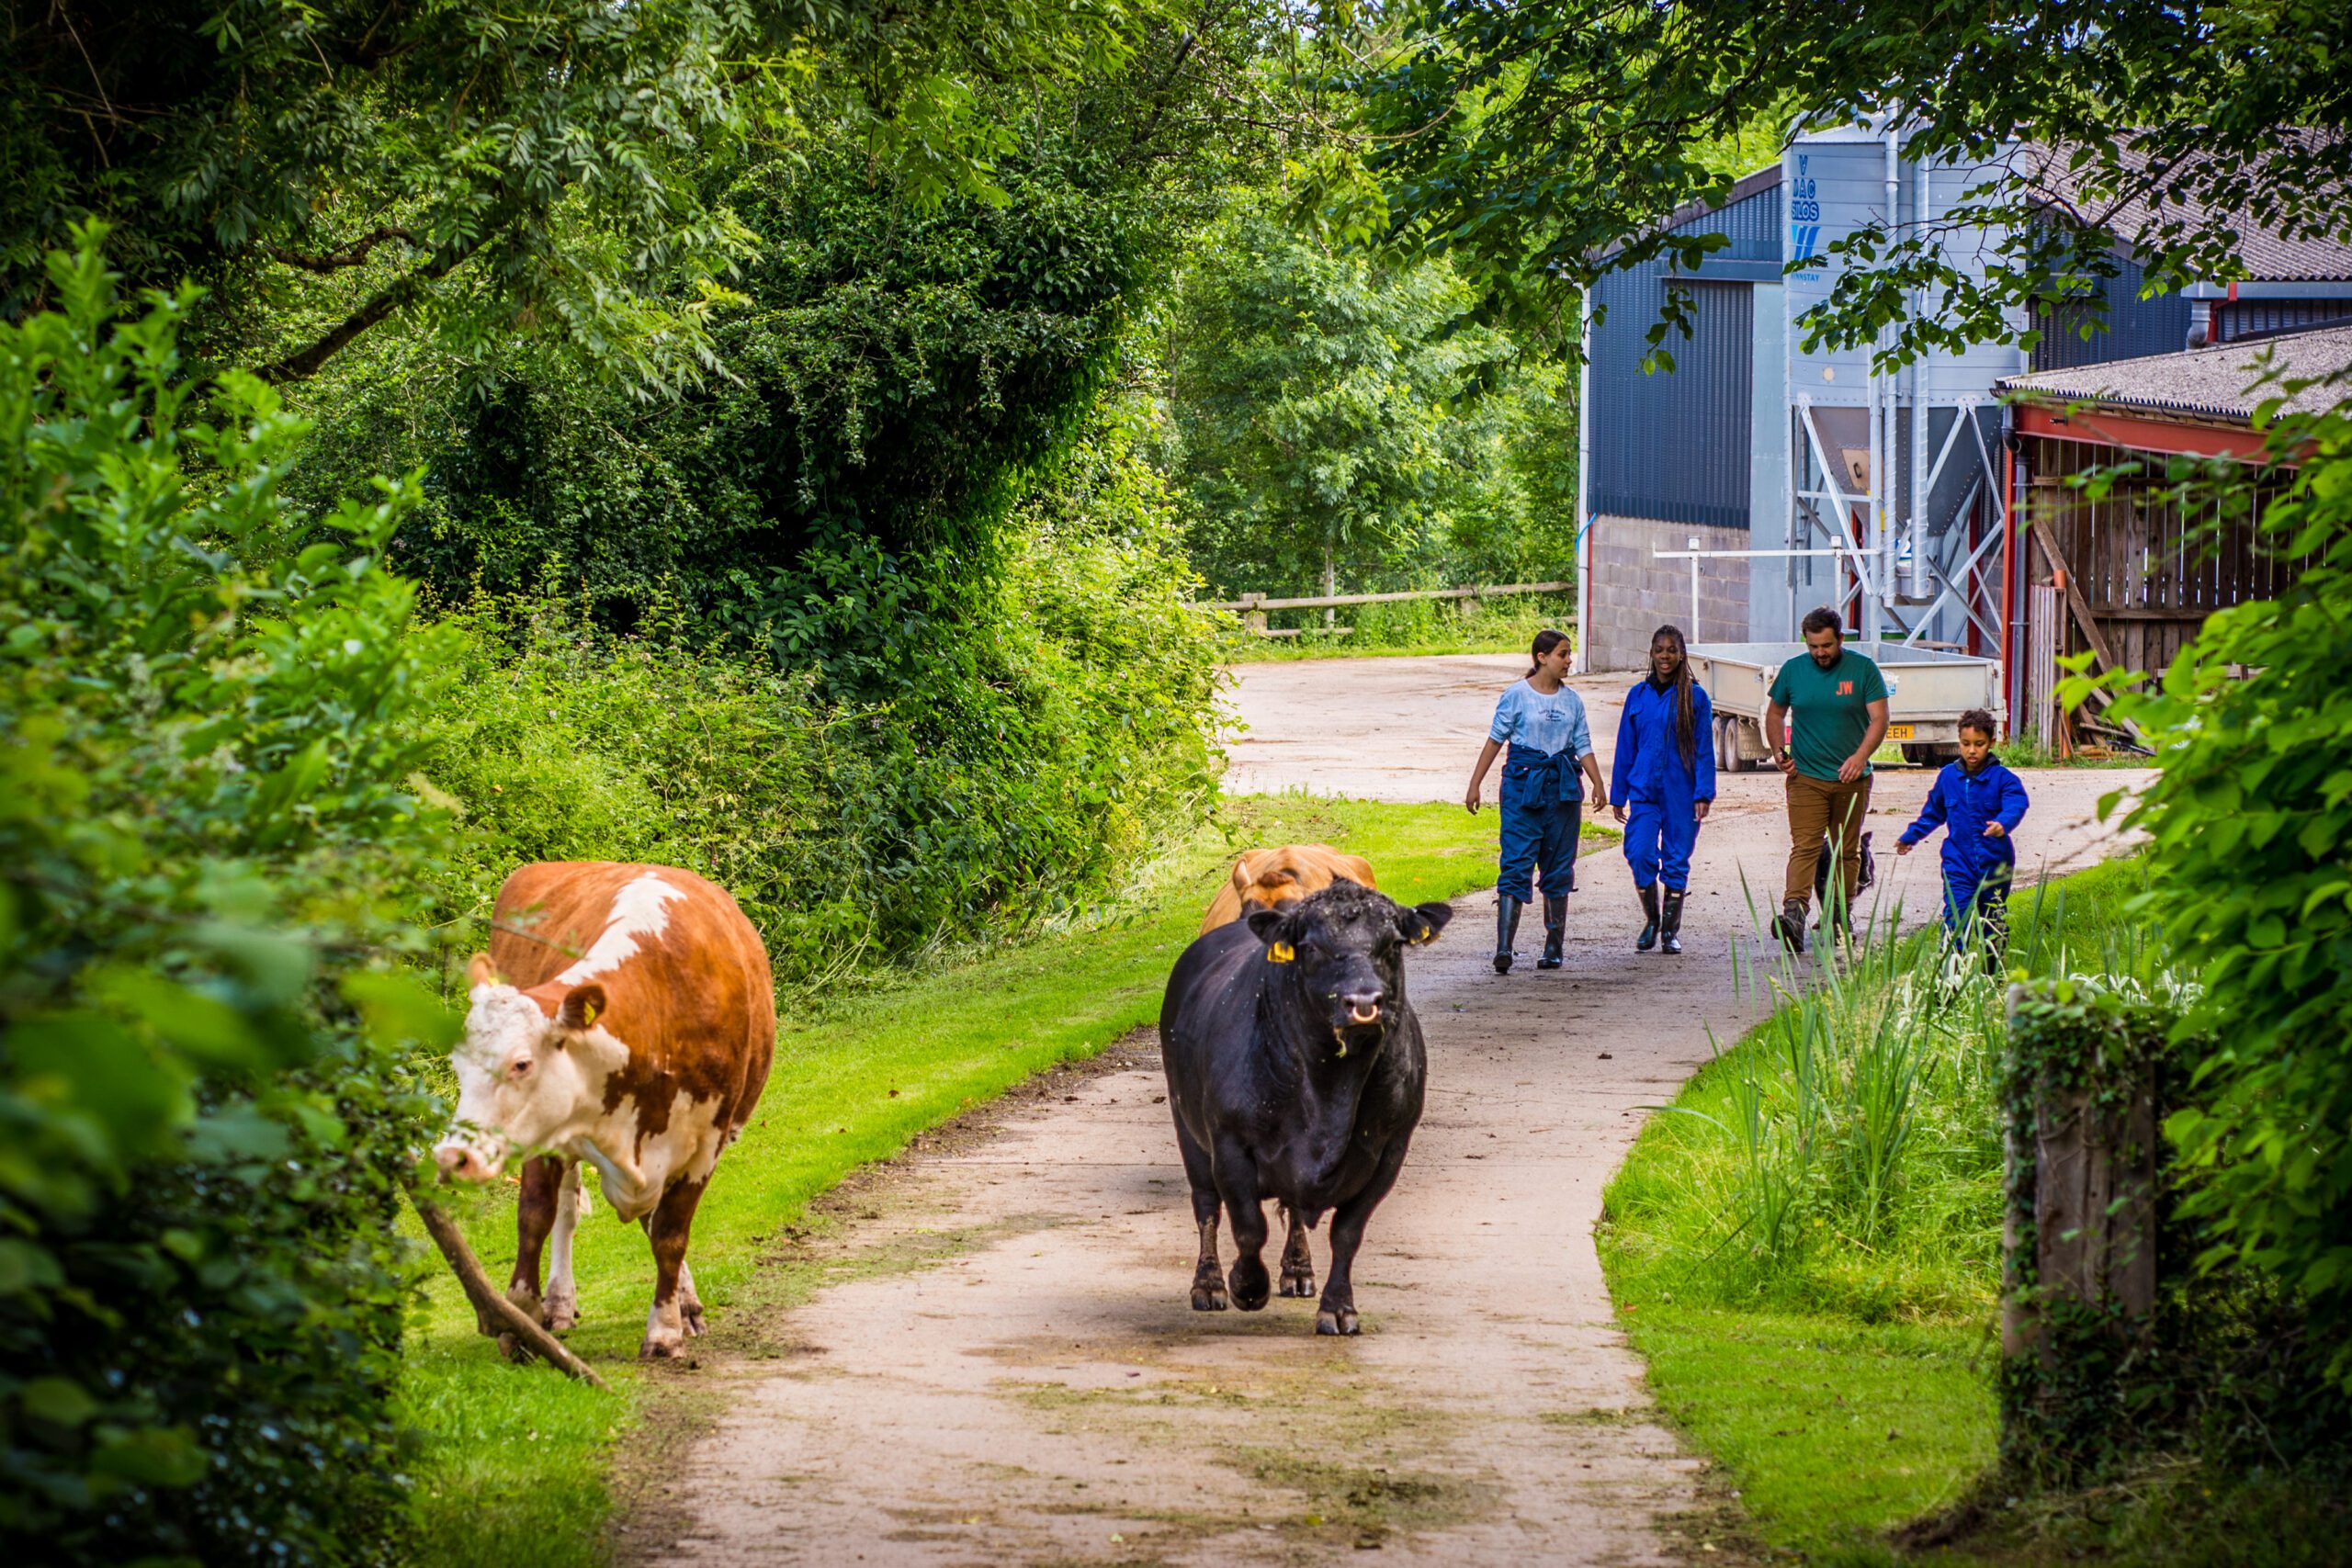 Young people in the distance walking up a path behind two cows at the Hereford farm.